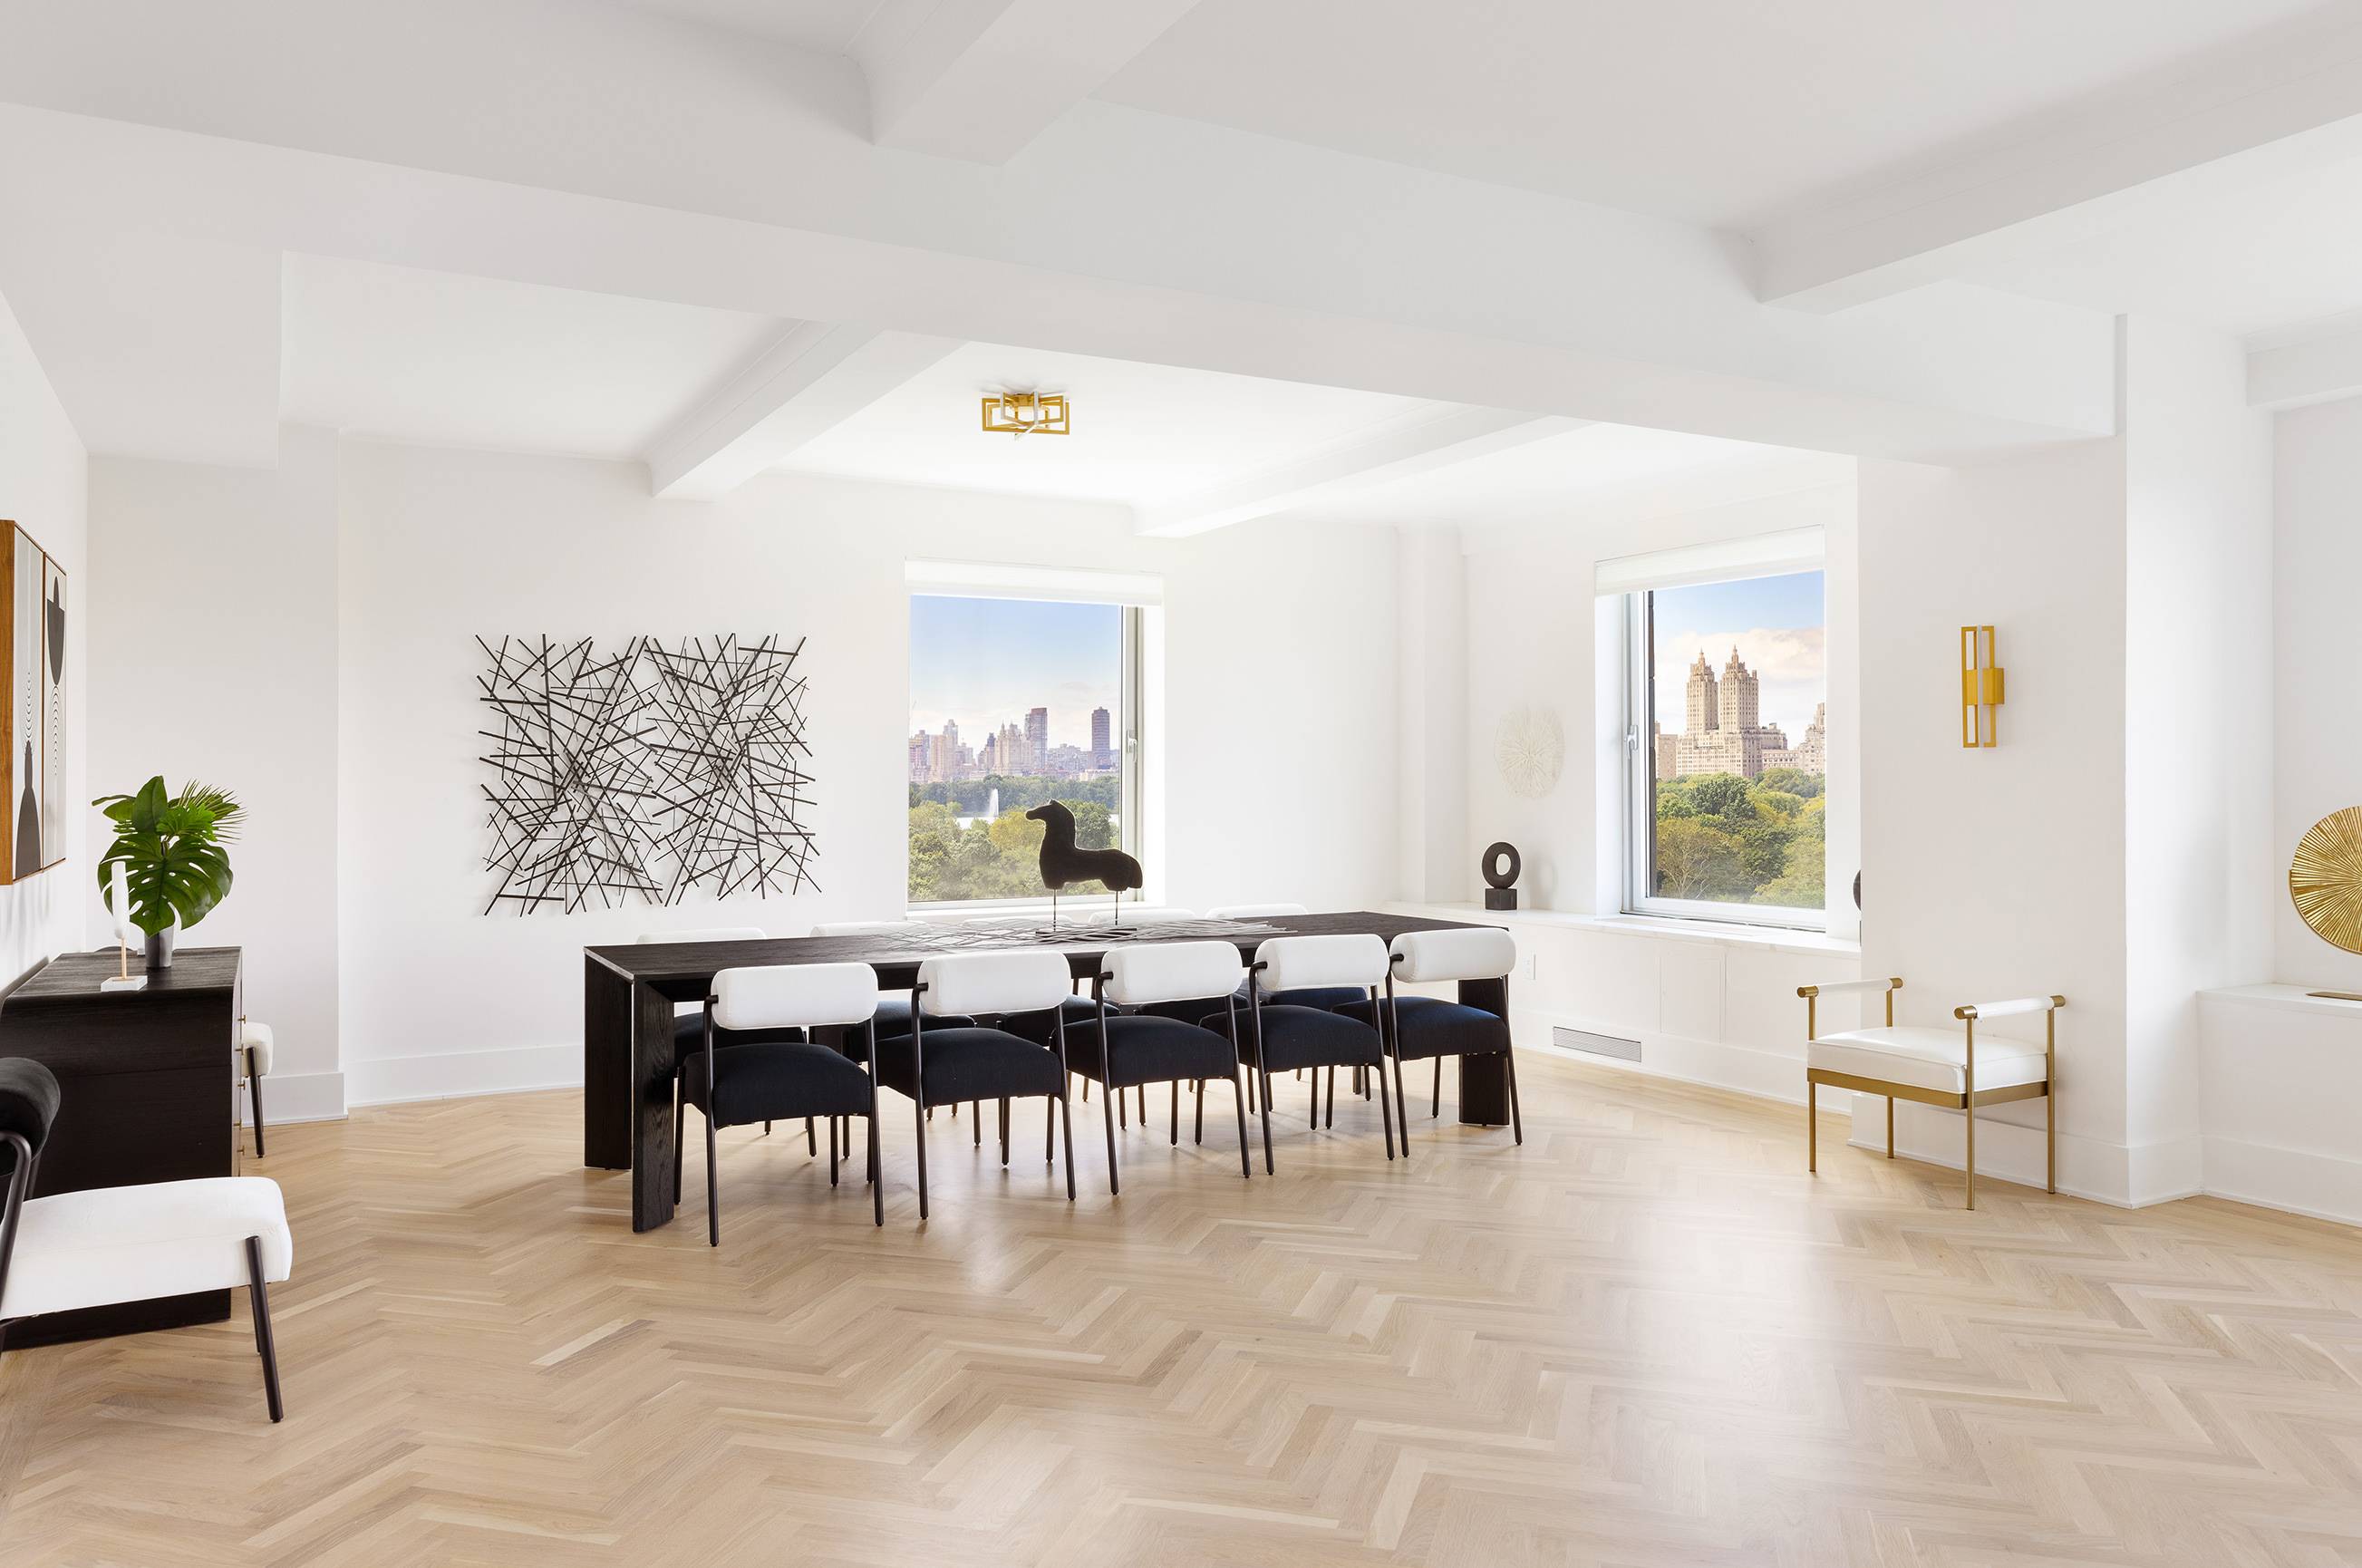 Fifth Avenue state of the art apartment  with Central Park vues !!